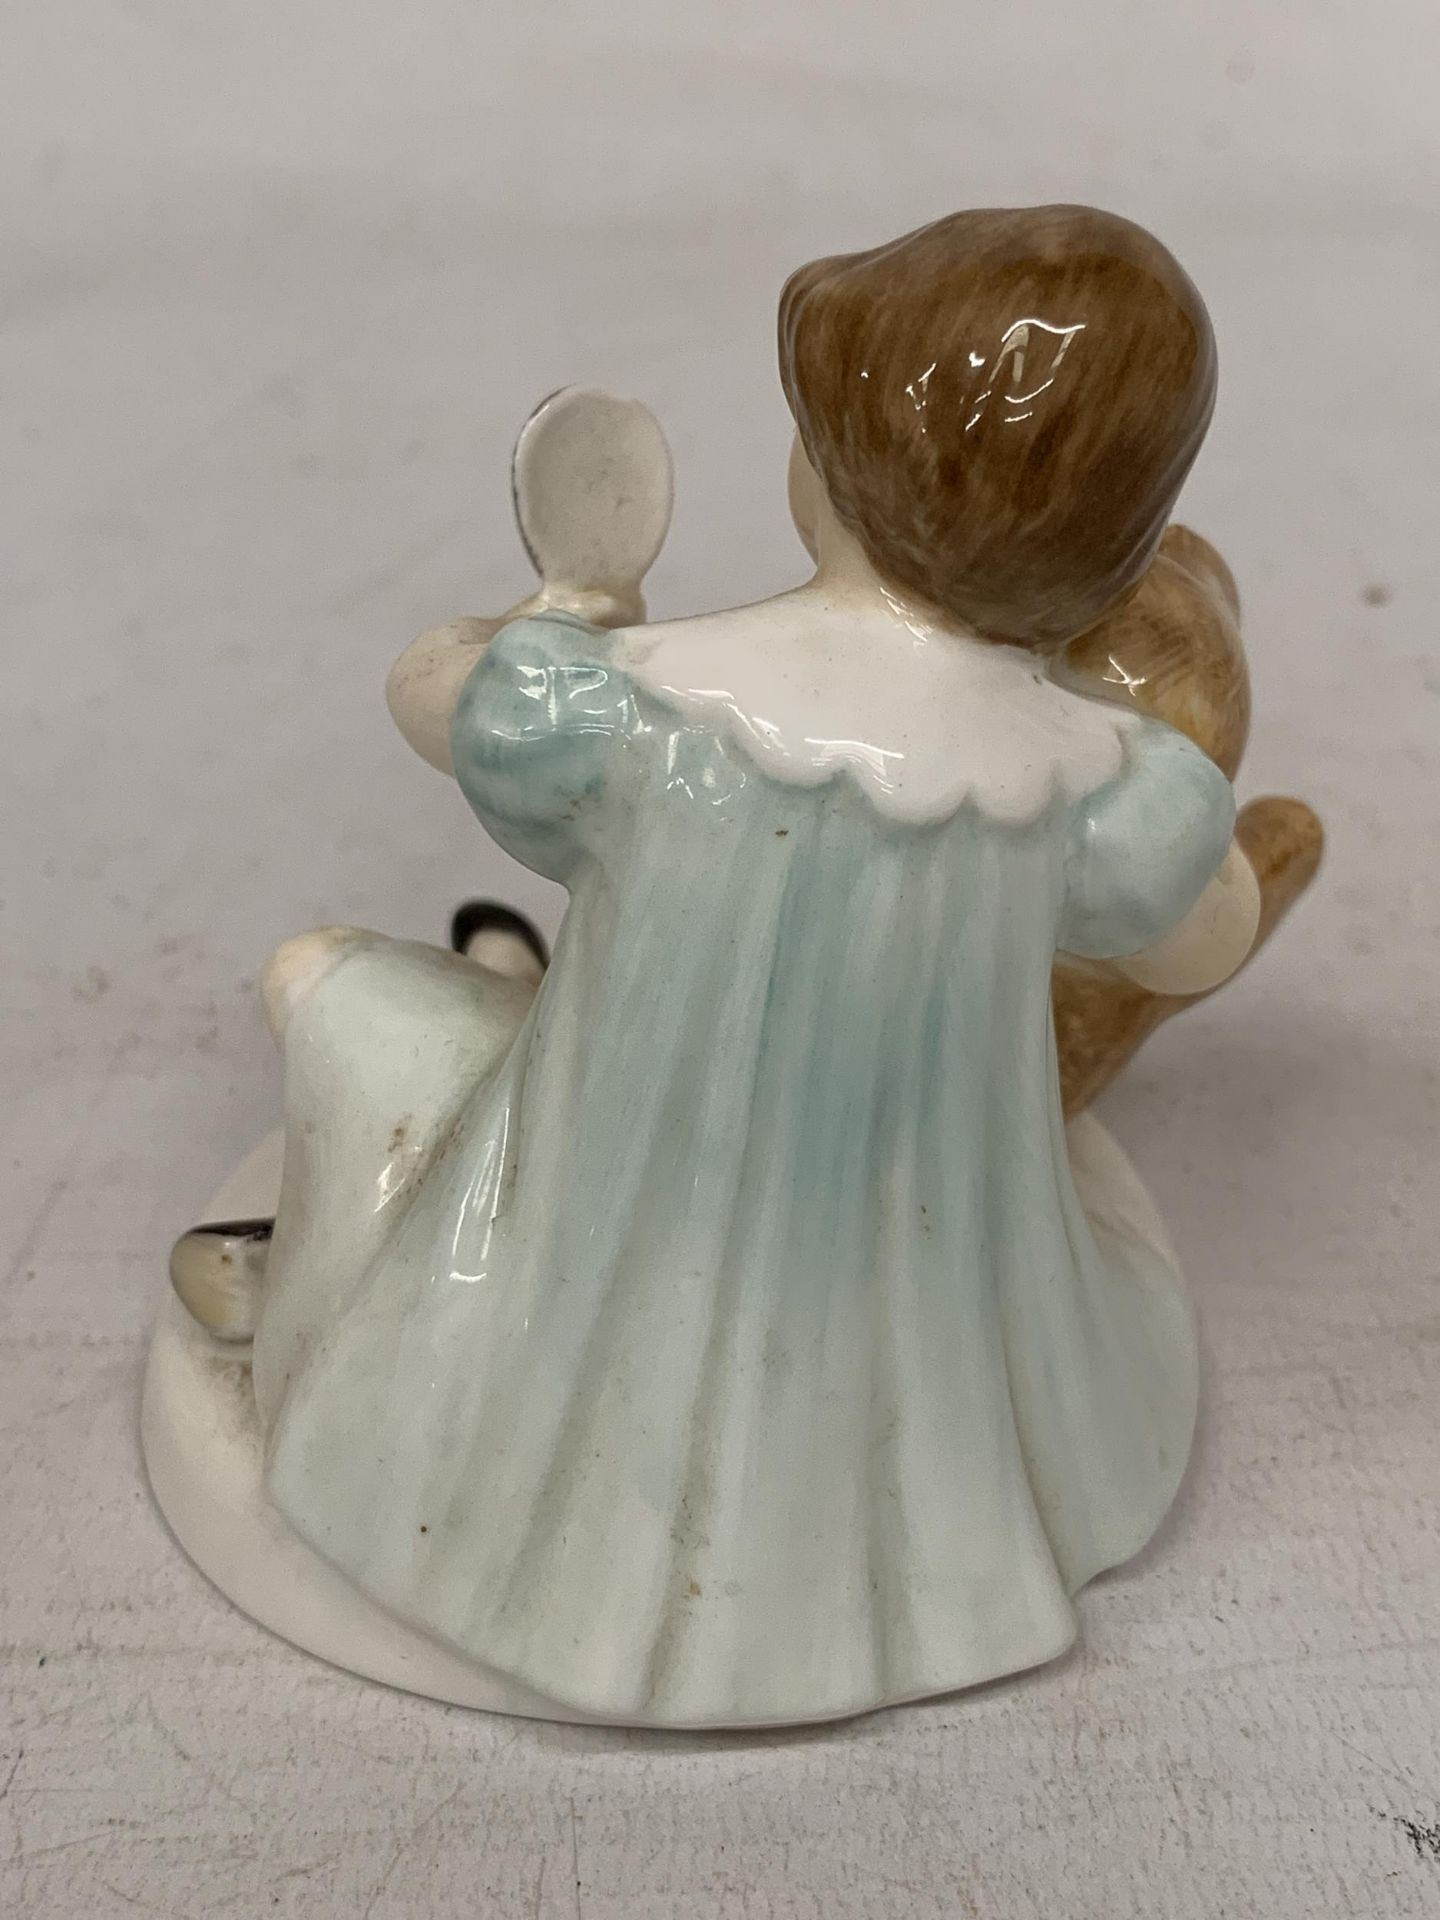 A ROYAL DOULTON FIGURE "MY TEDDY" HN 2177 - Image 3 of 5